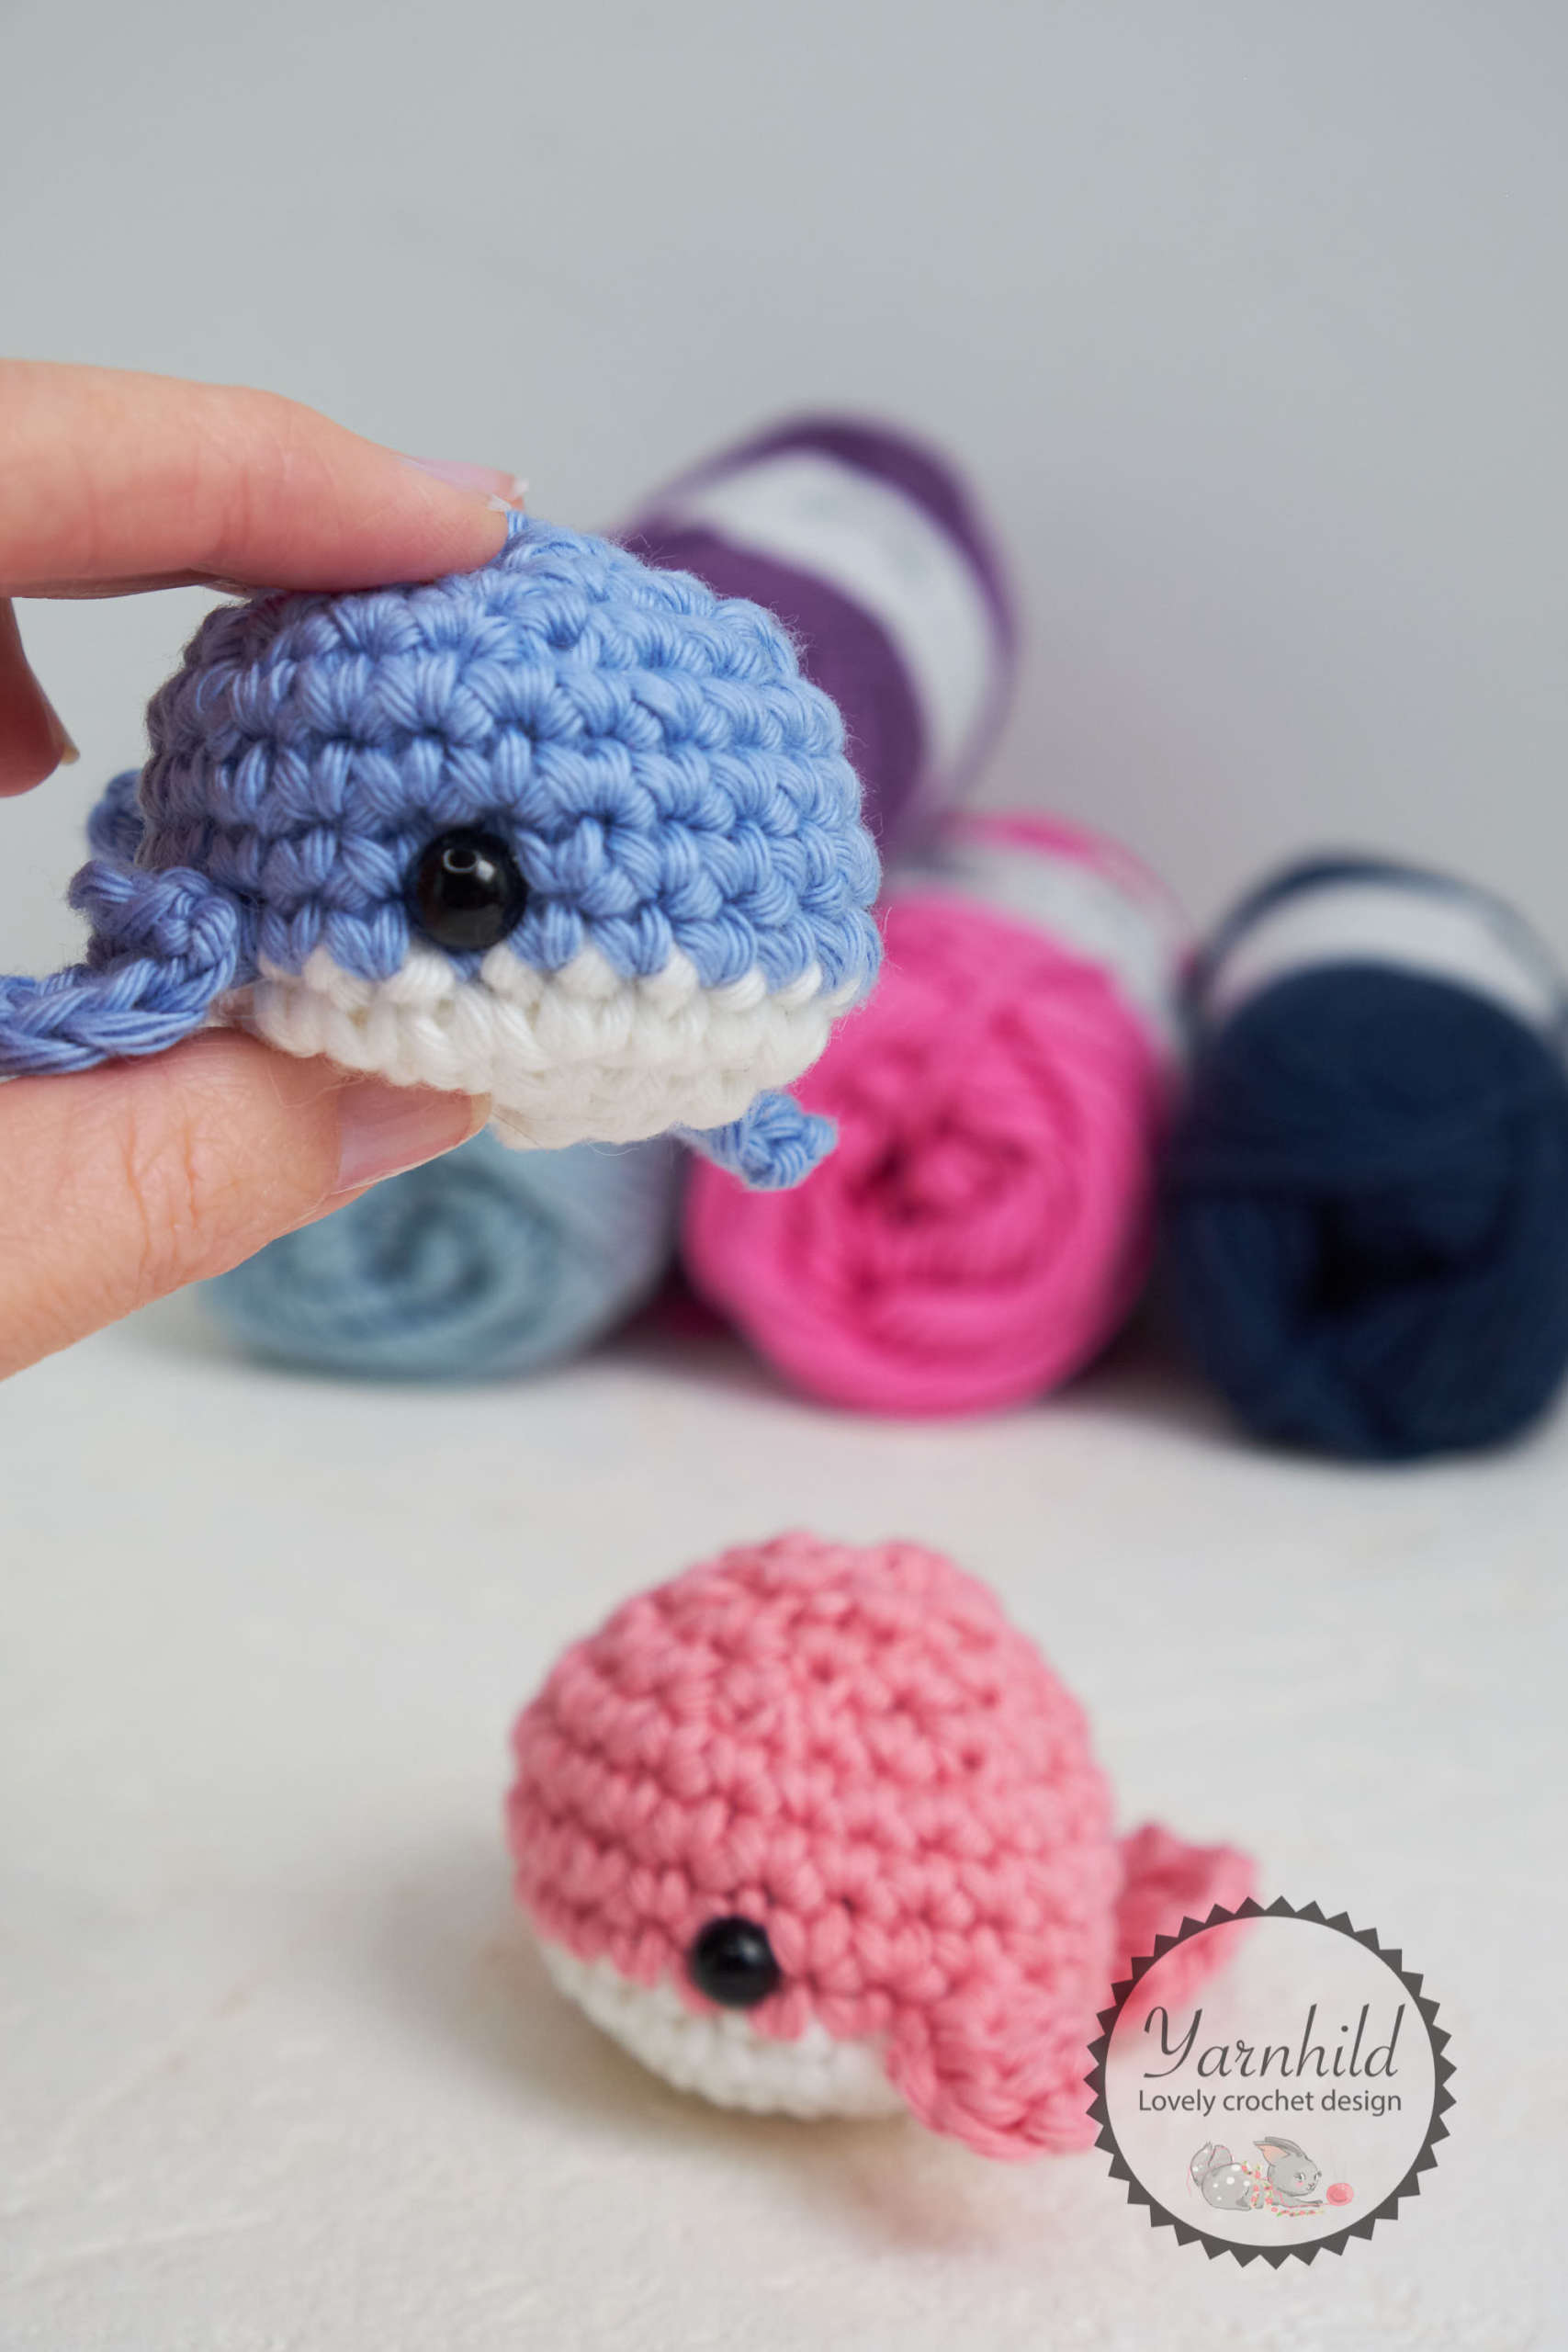 How to Crochet a Magic Ring for Amigurumi - Cuddly Stitches Craft